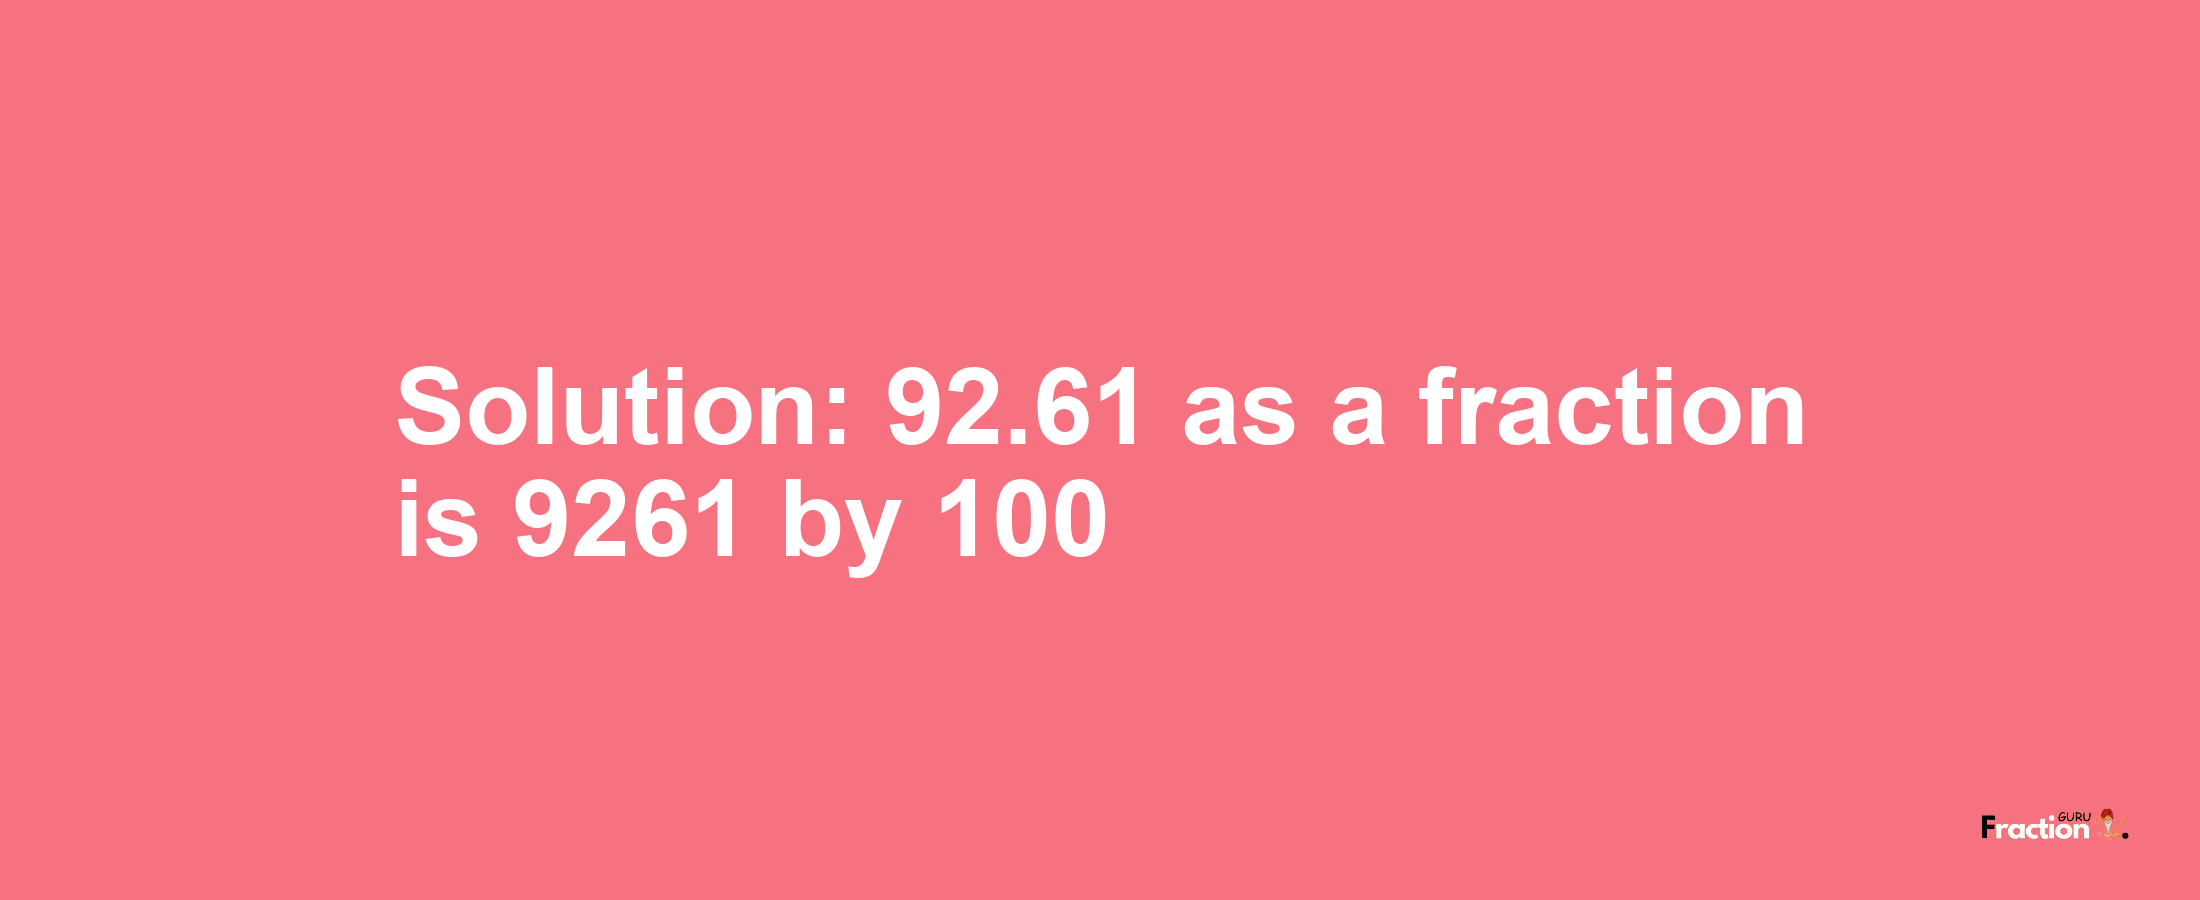 Solution:92.61 as a fraction is 9261/100